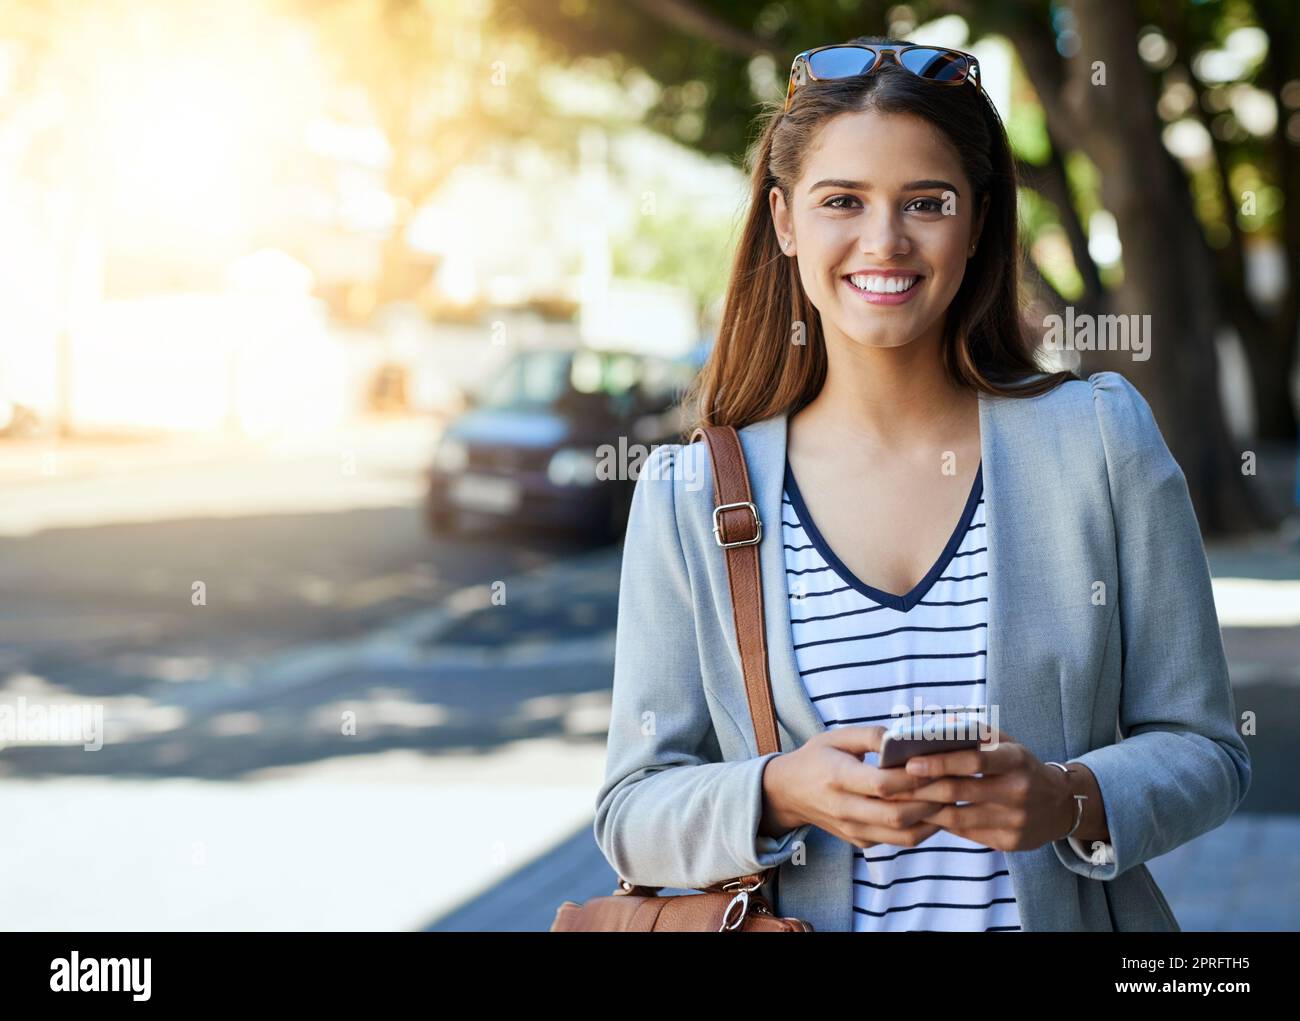 Connected on the move. Cropped portrait of an attractive young woman using her cellphone while commuting to work. Stock Photo